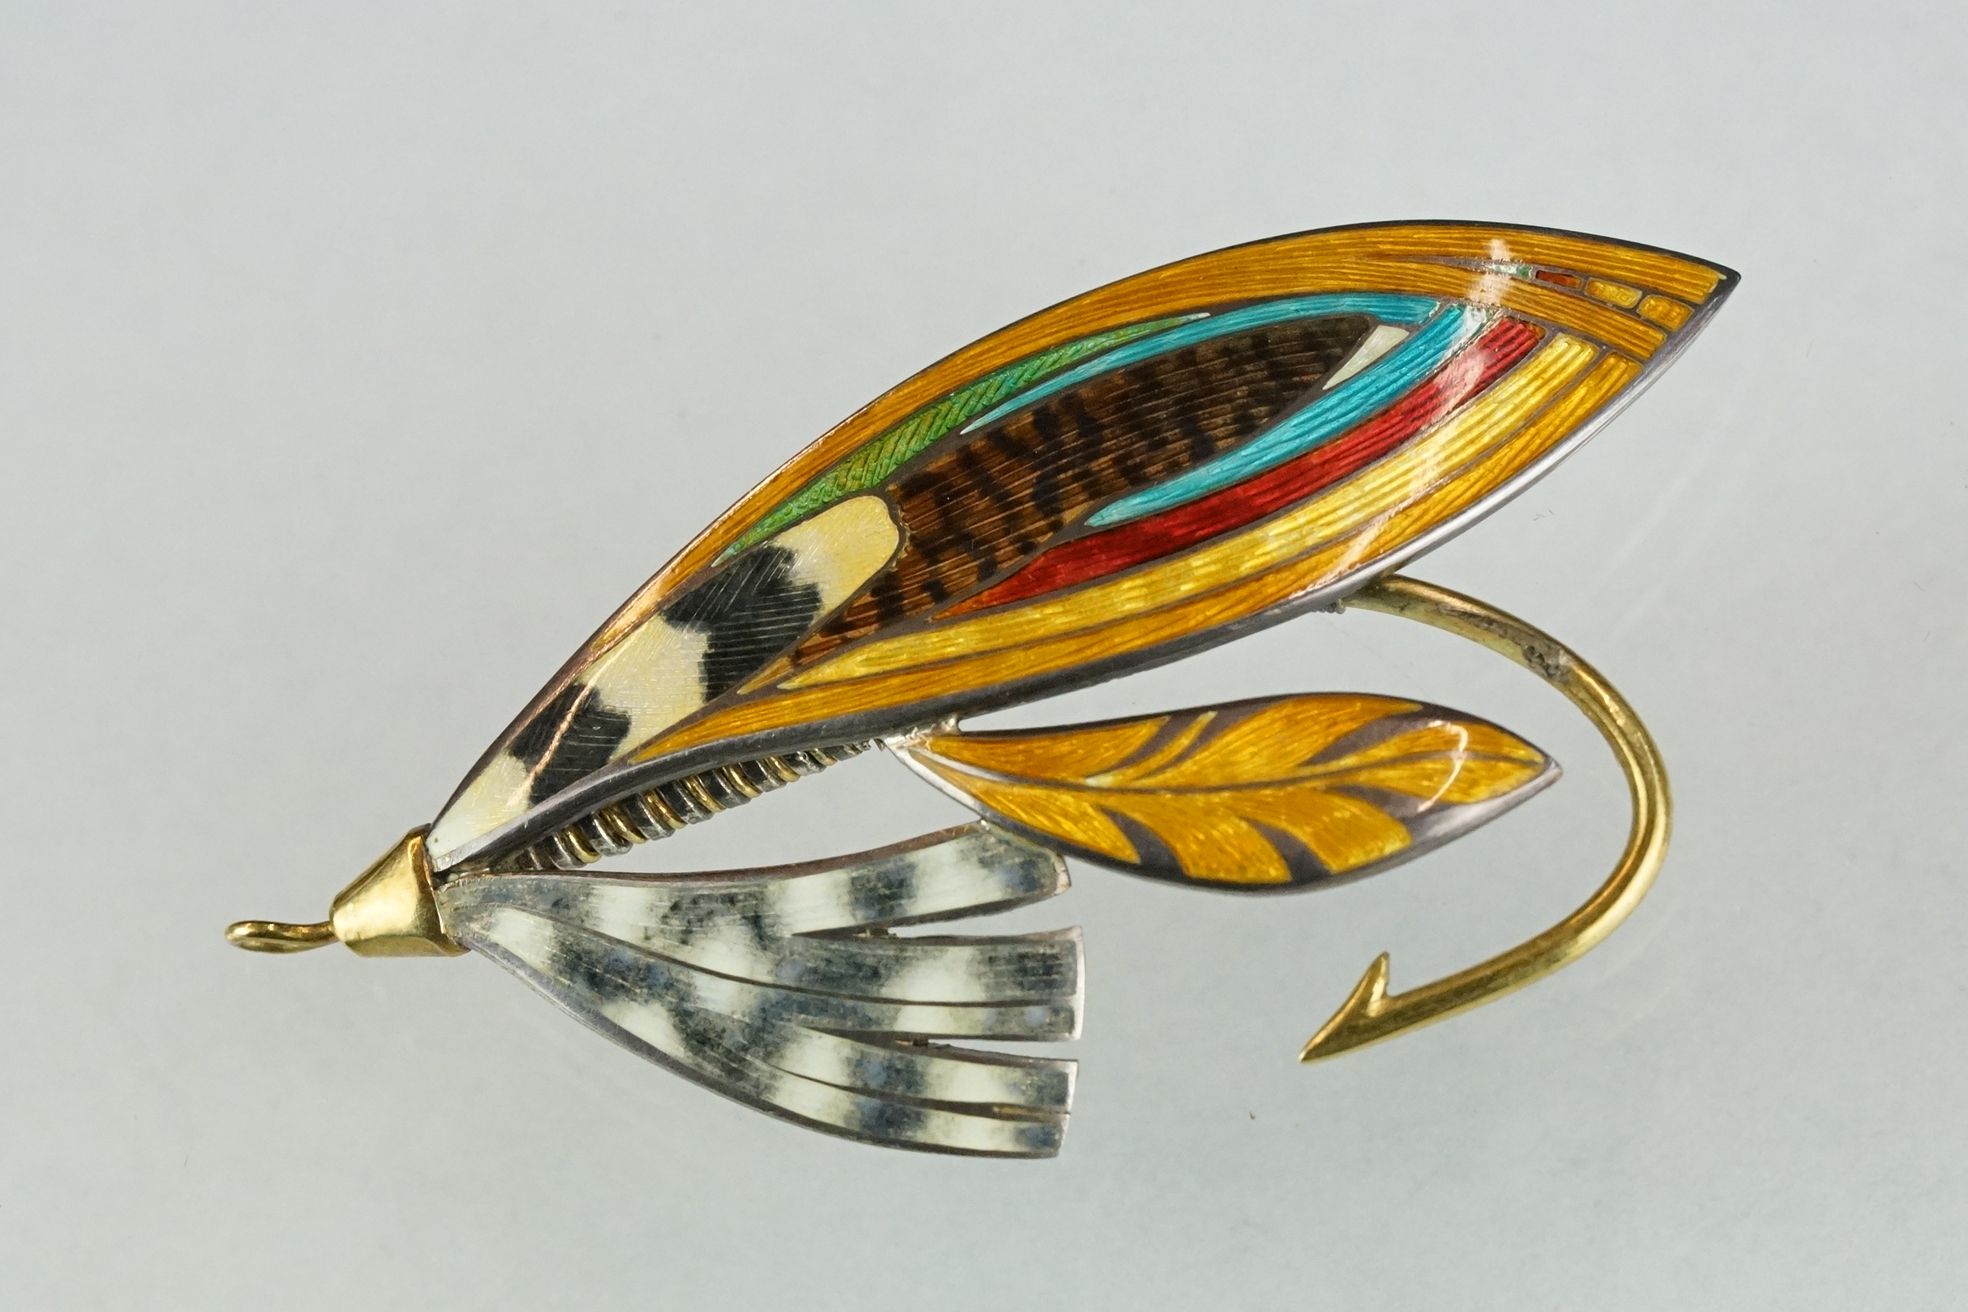 A fully hallmarked sterling silver and enamel brooch in the form of a fishing fly.